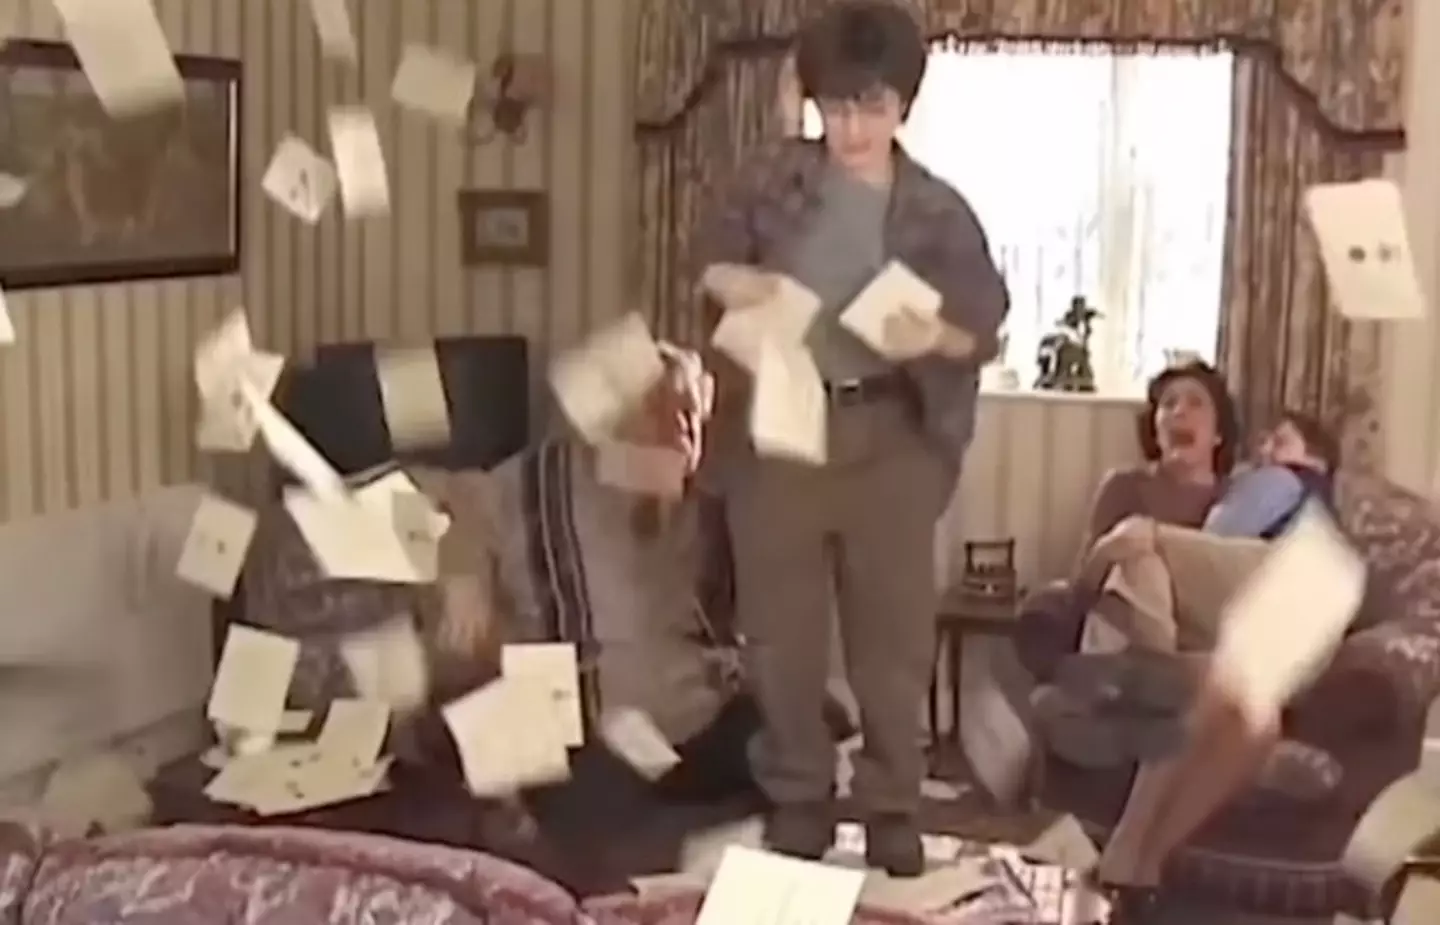 Hundreds of letters flew into the living room for Harry to get his hands on.